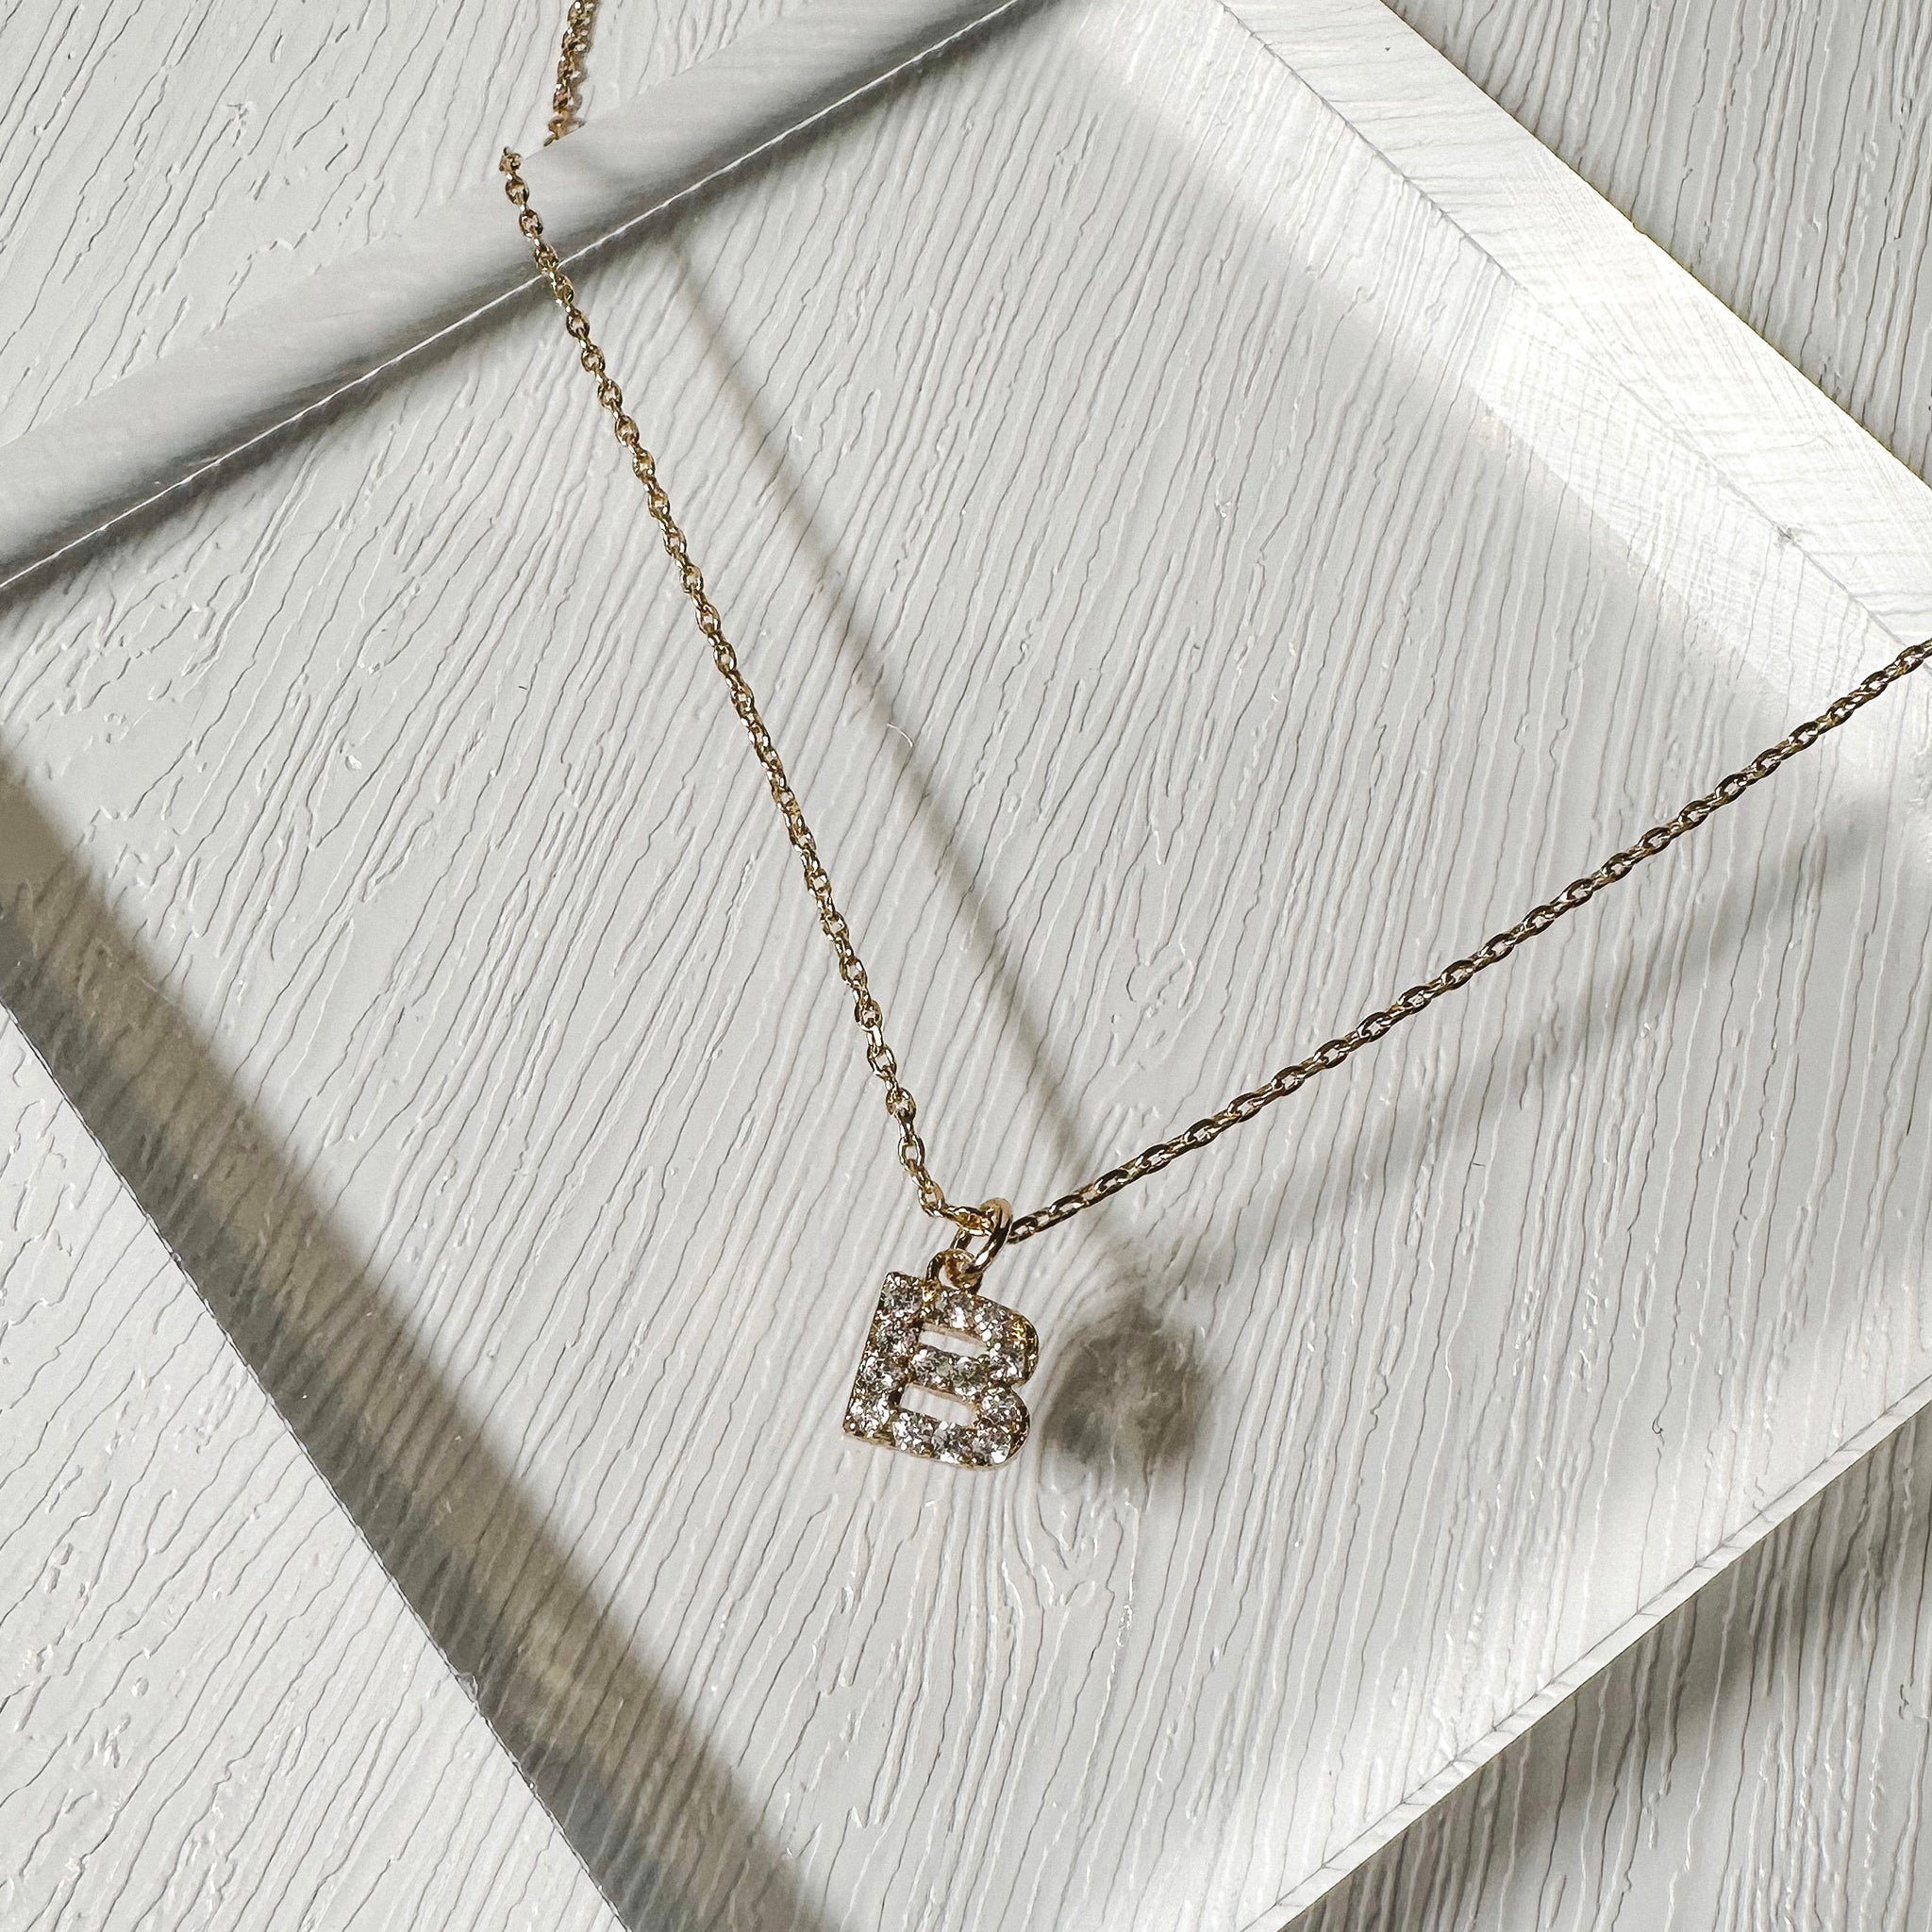 Rhinestone Tennis Chain Initial Necklace | Life's Lil Luxuries